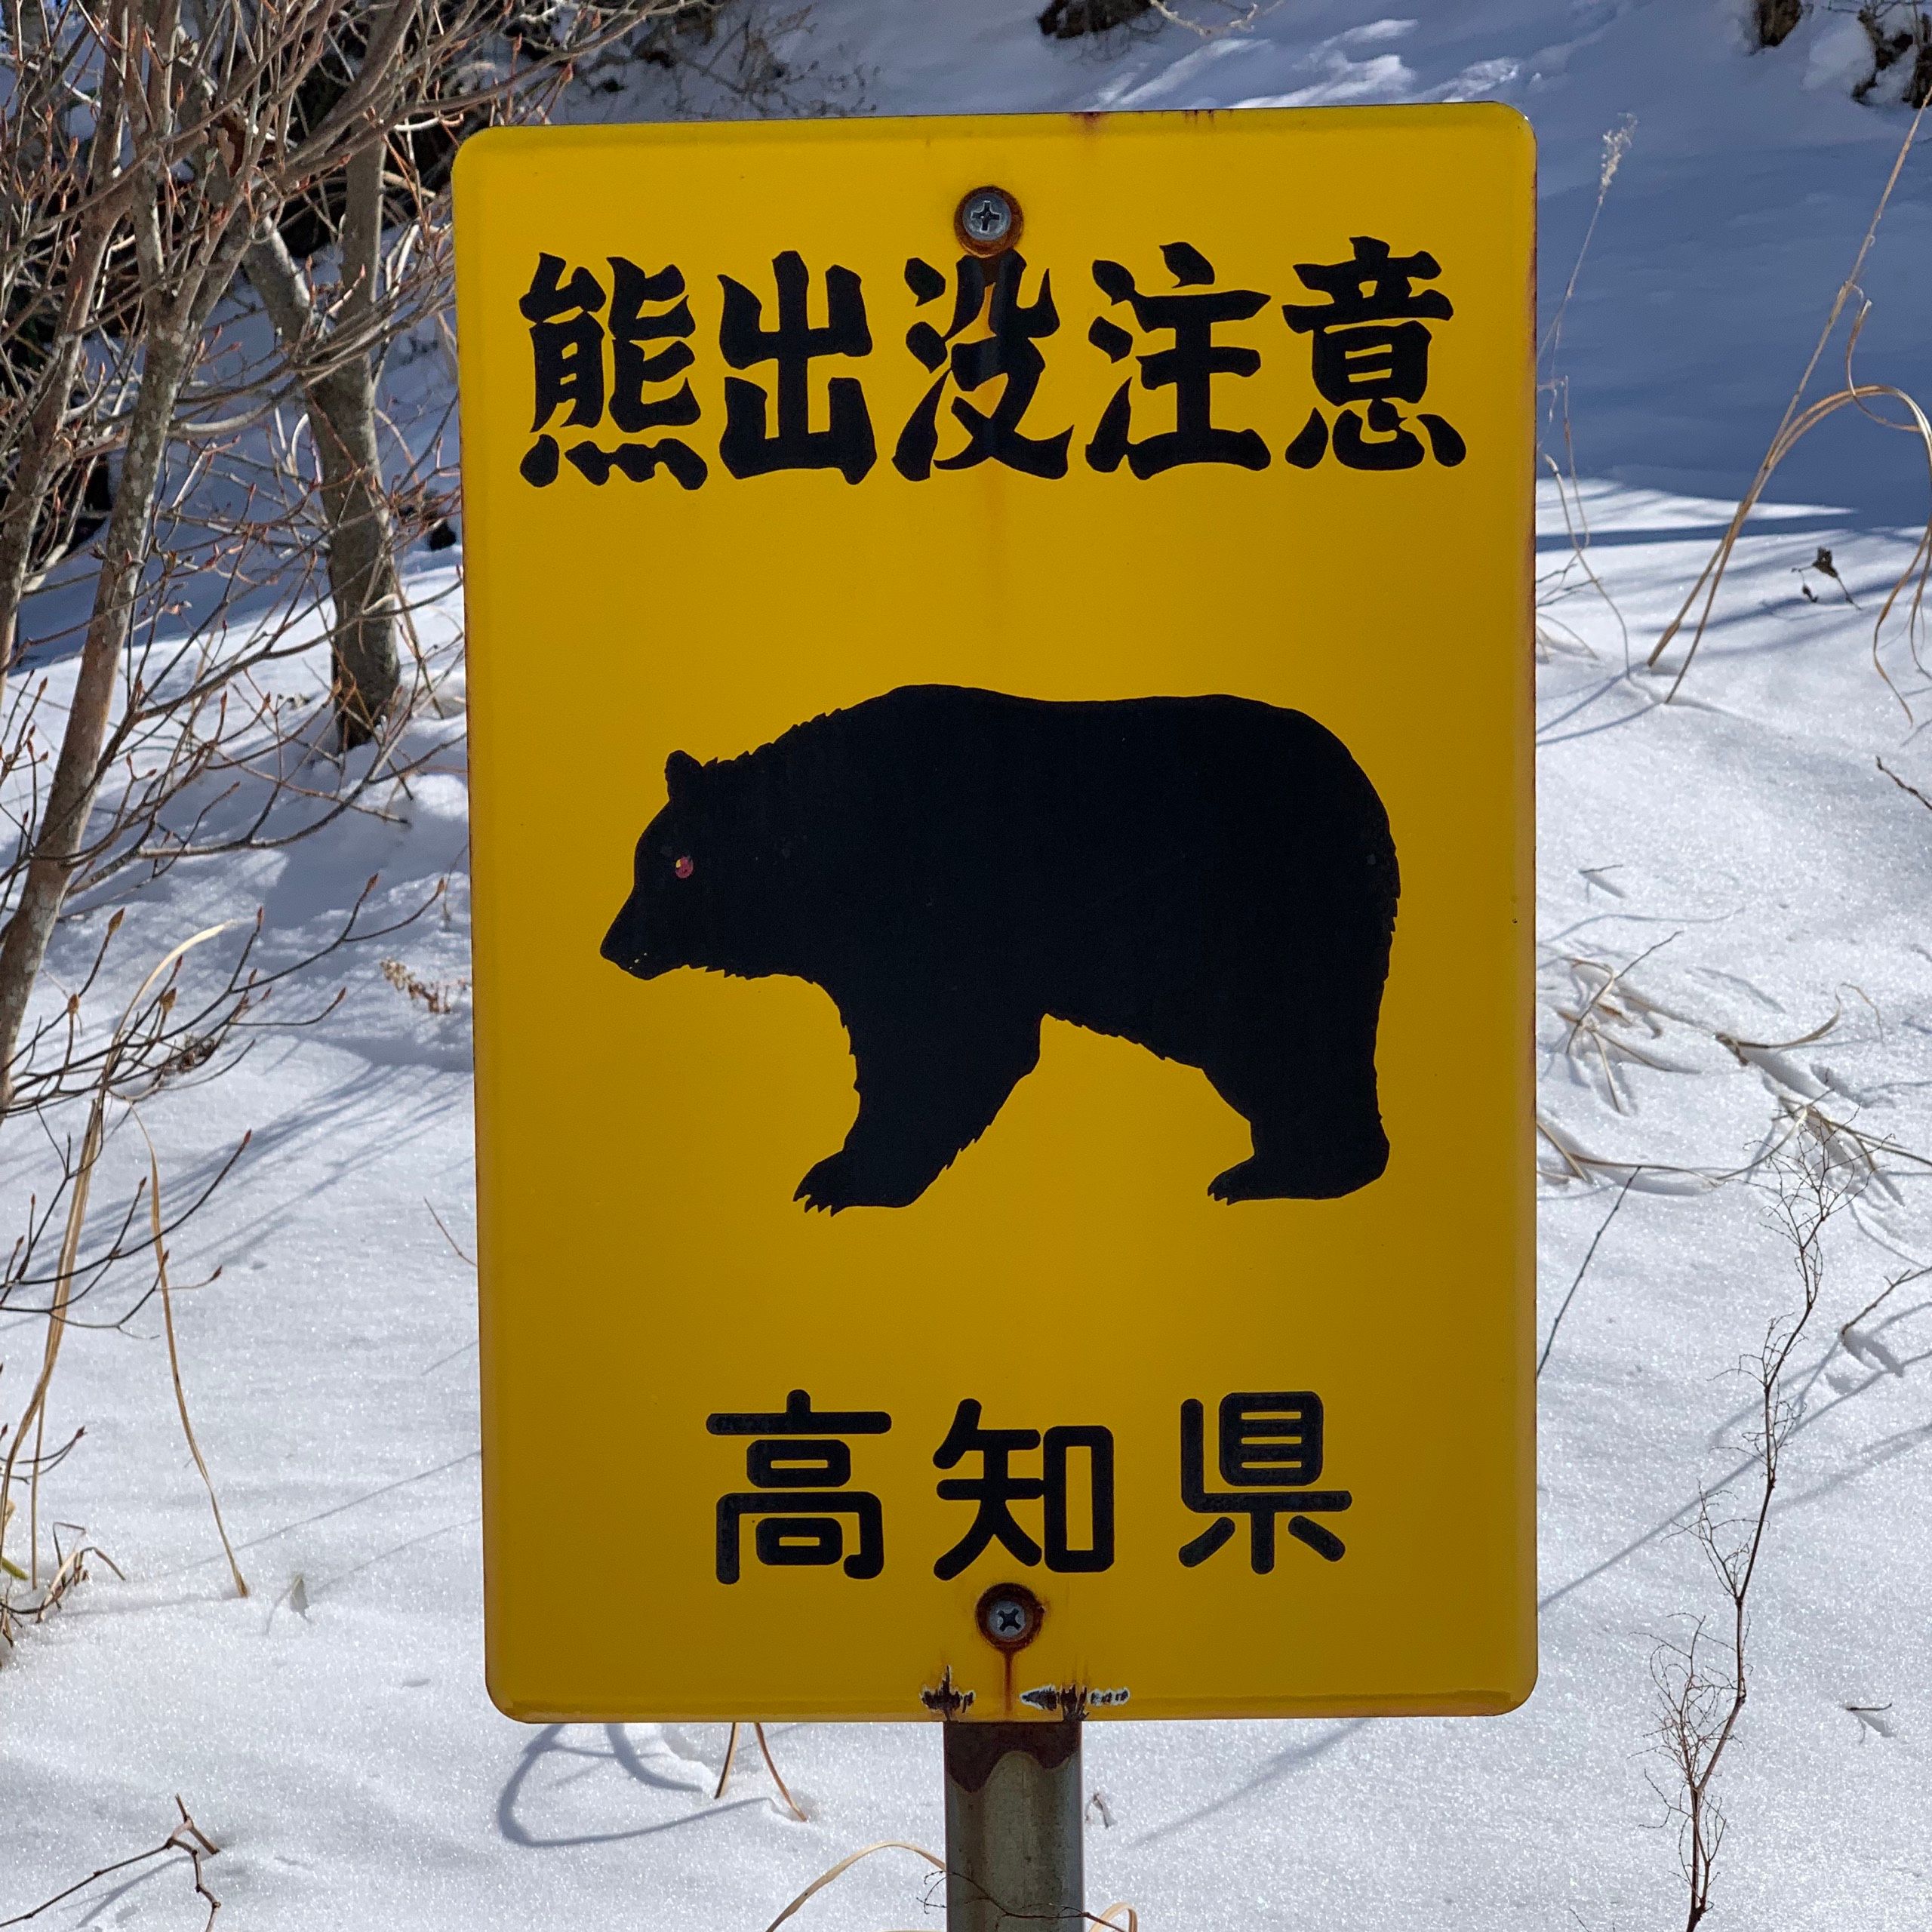 A yellow road sign warning against bears.